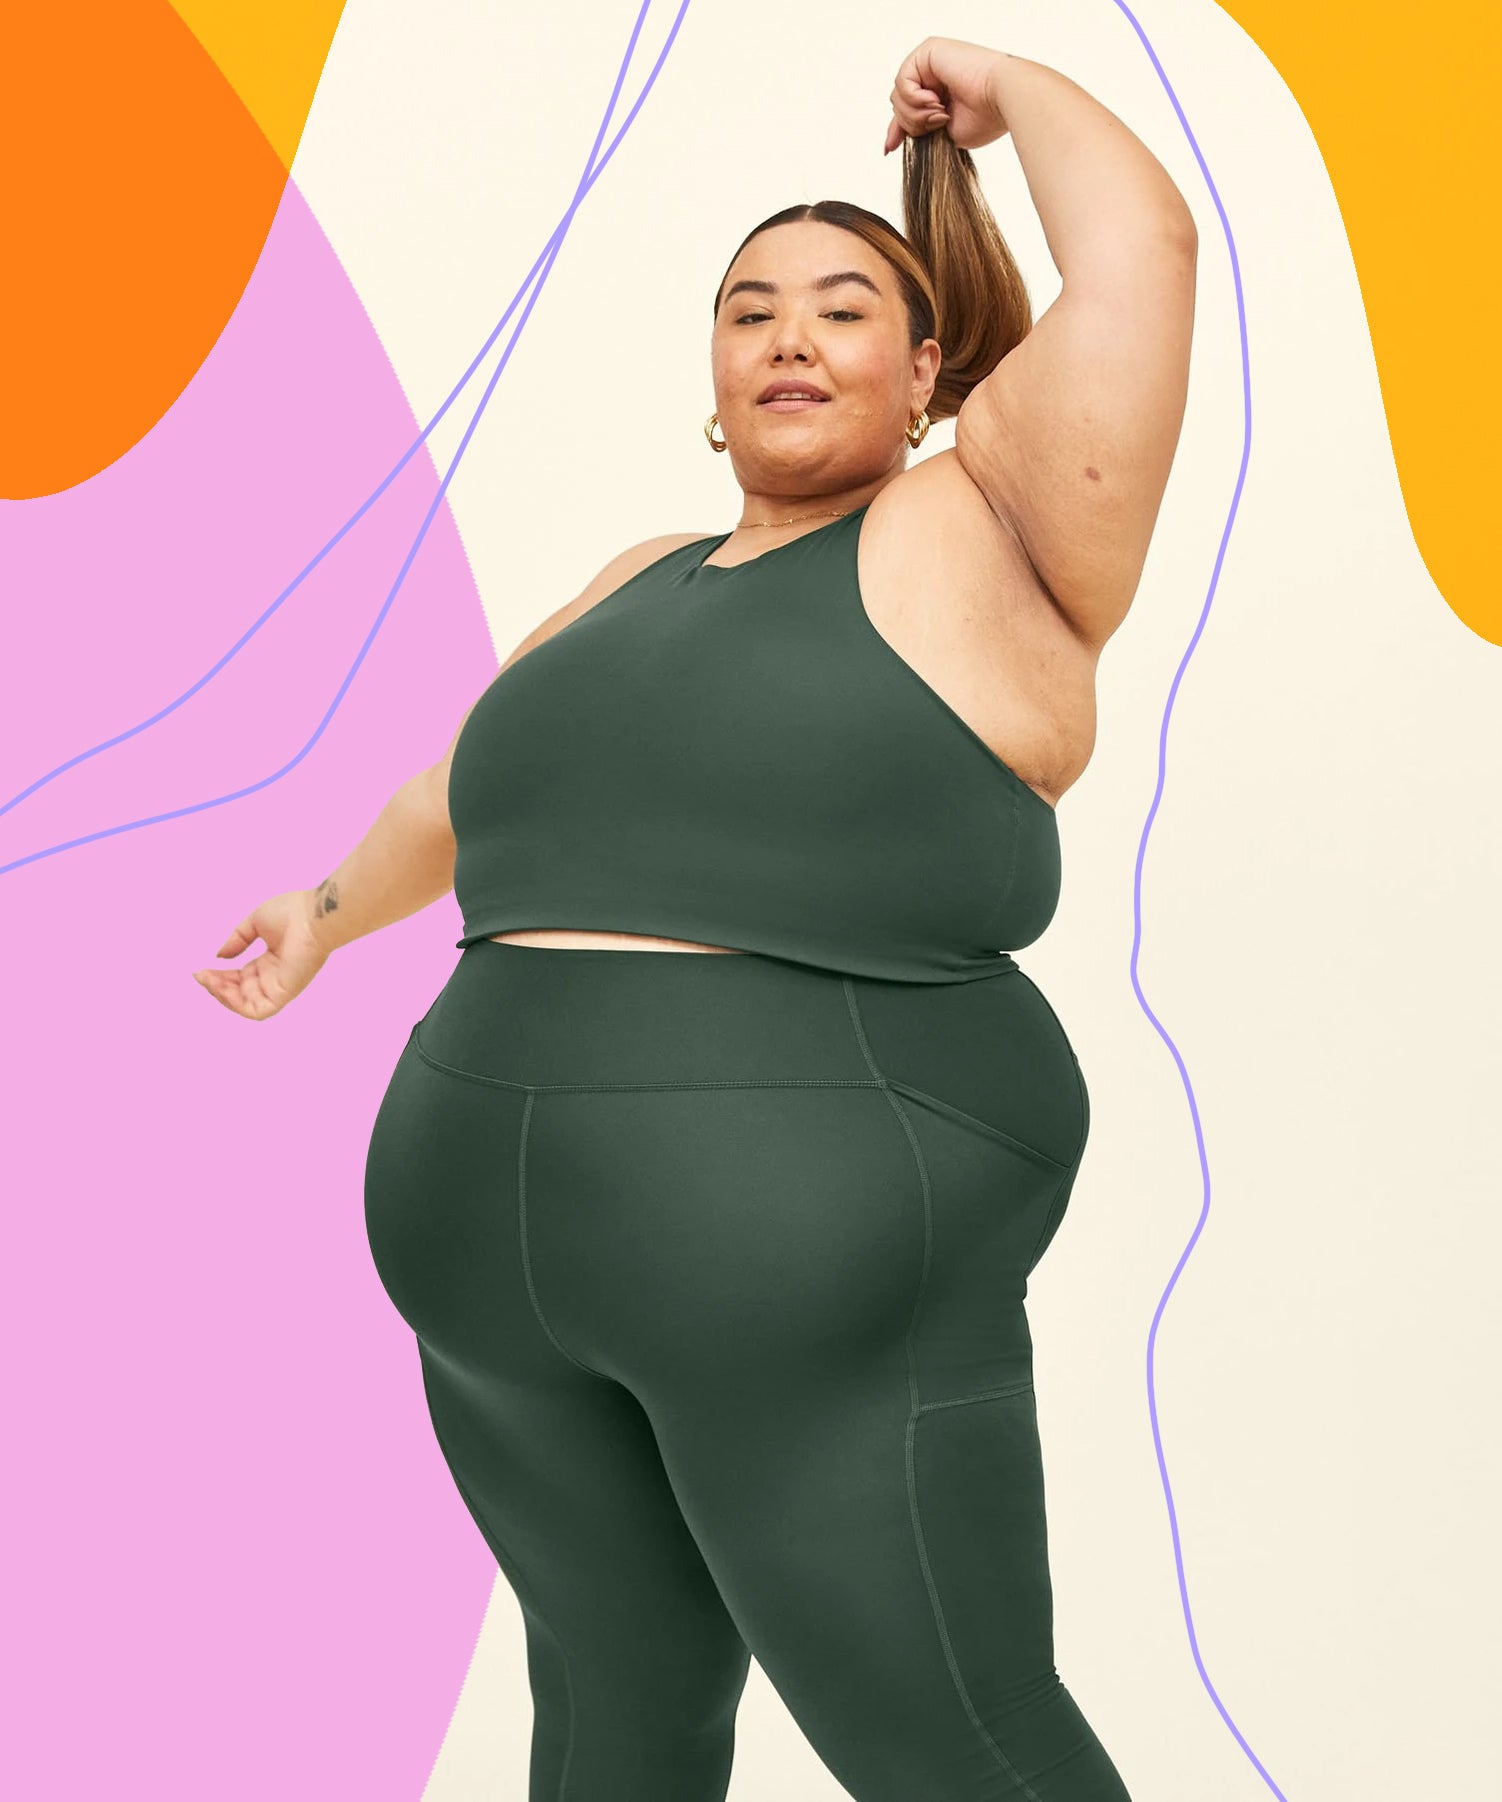 Here’s What “Plus-Size” Really Means — Fashion Brands, Take Note